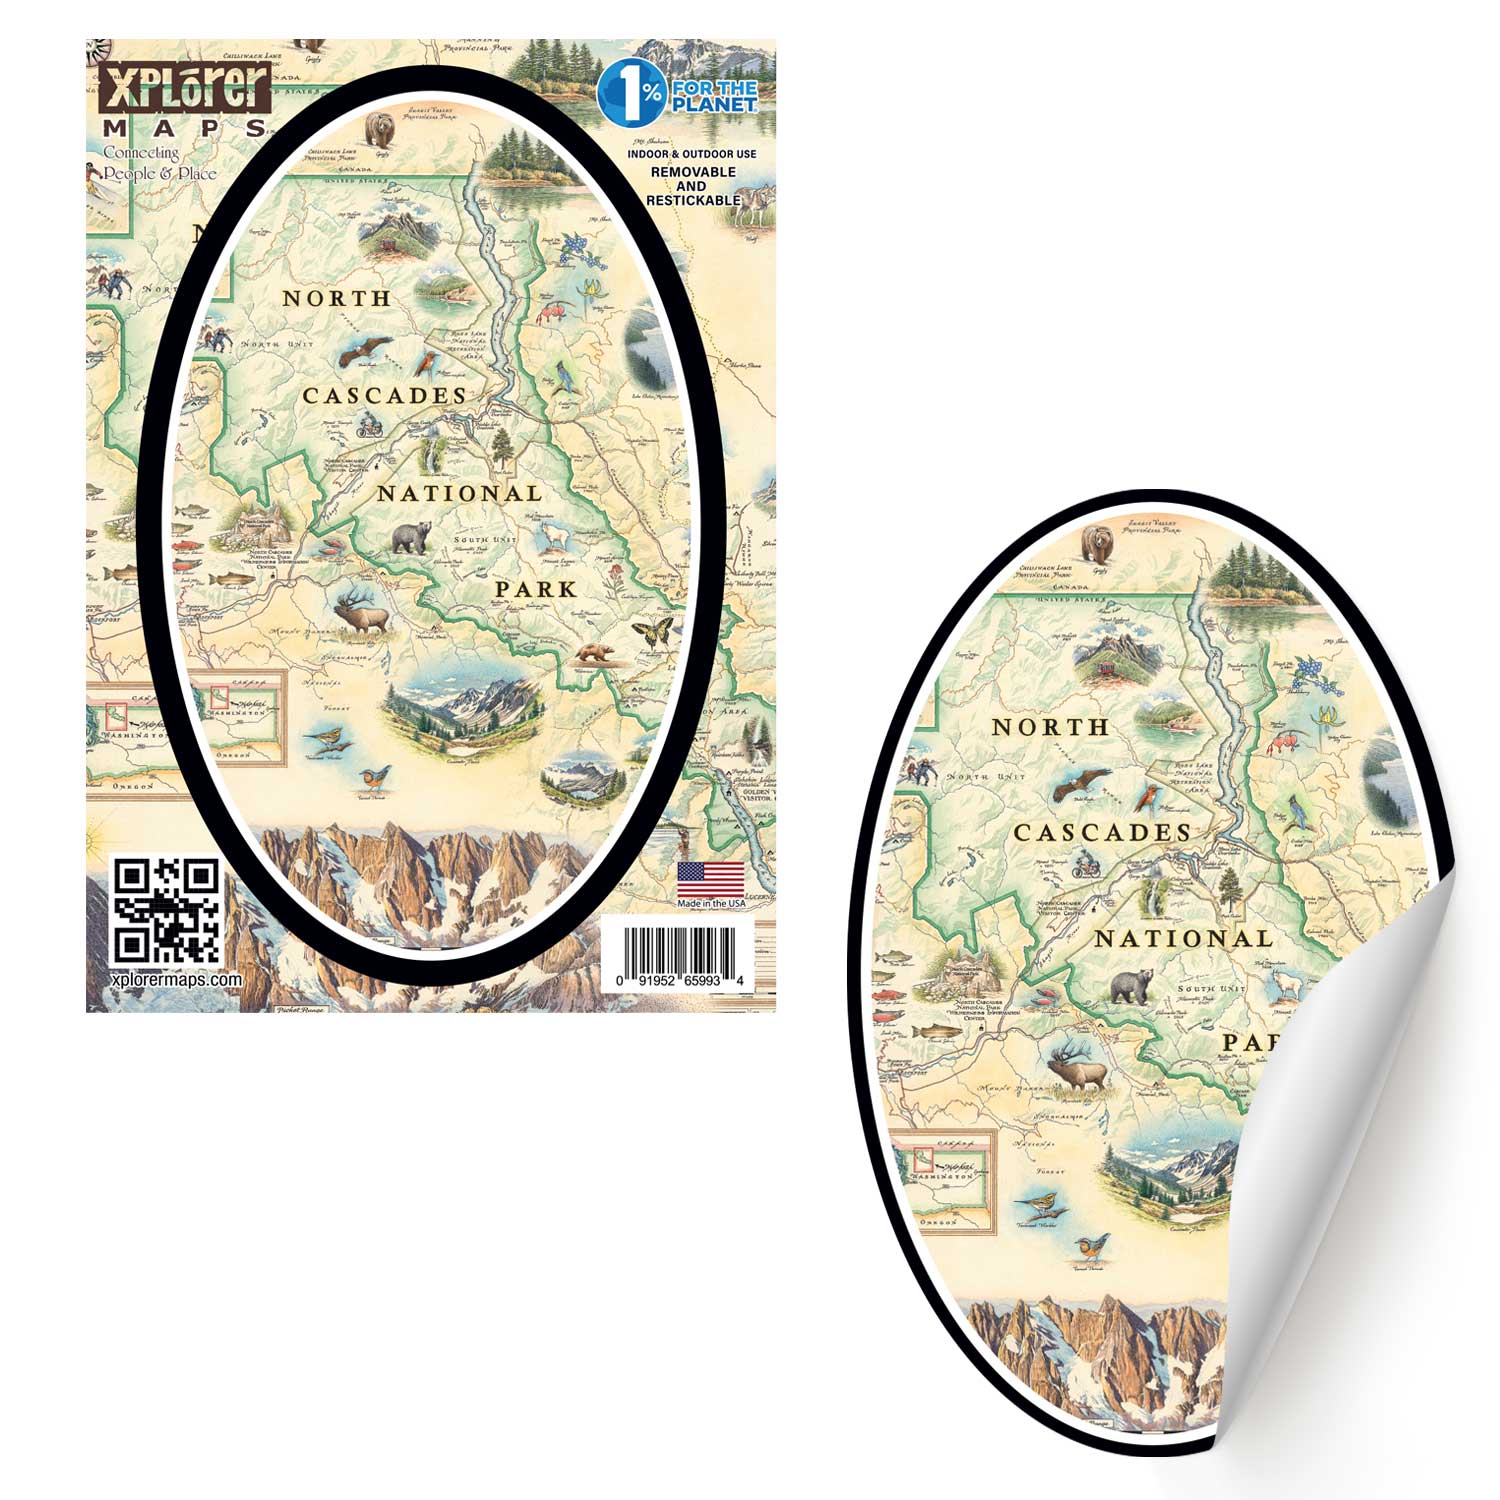 North Cascades National Park Map Sticker by Xplorer Maps. The map The cup features a grizzly bear, Mountain goat, flowers, Lake Chelan Recreation Area, and Majestic Mountains. 